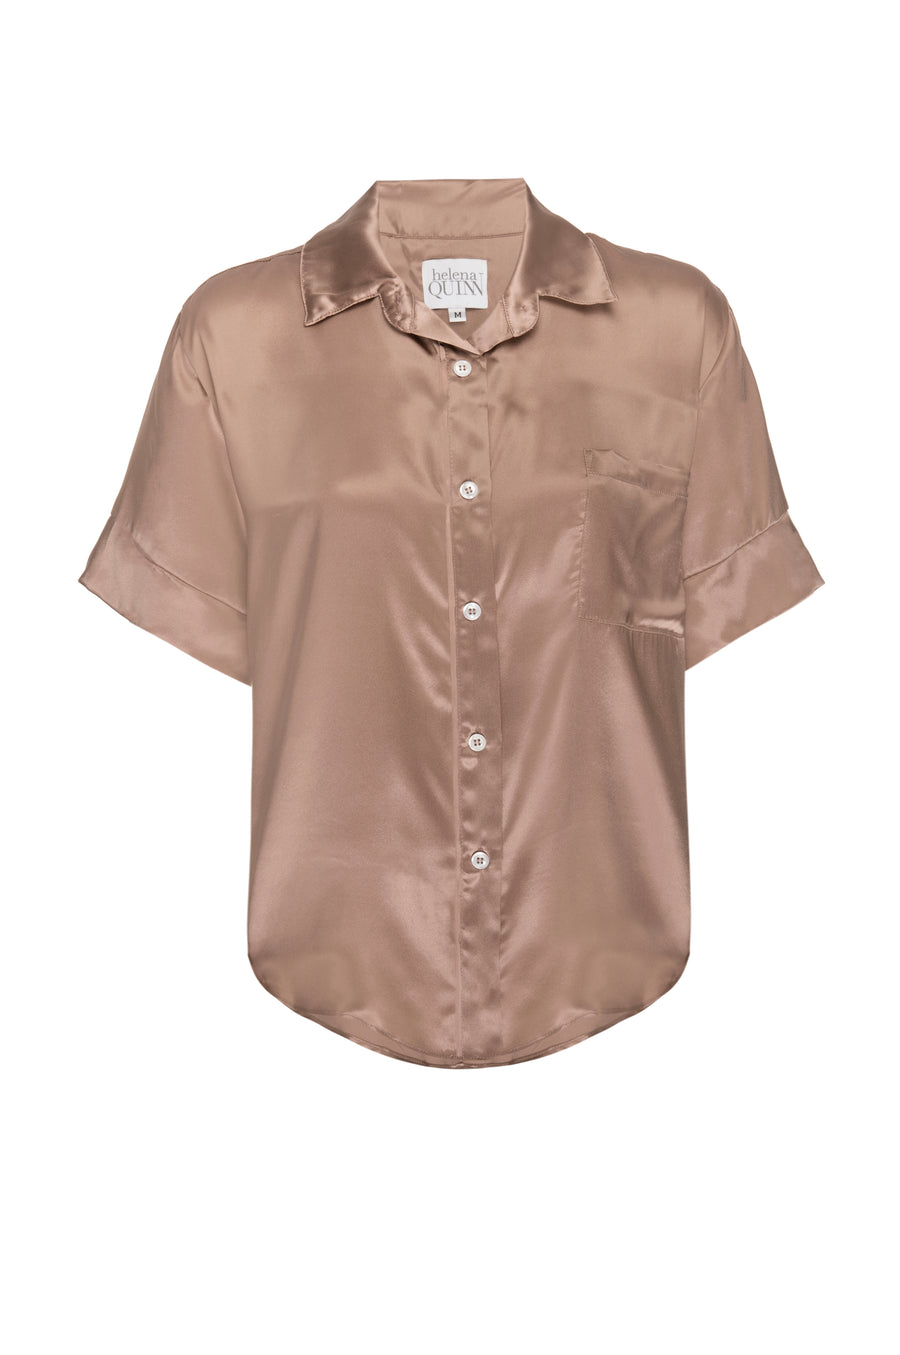 Silk Charmeuse Short Sleeved Top: Apricot